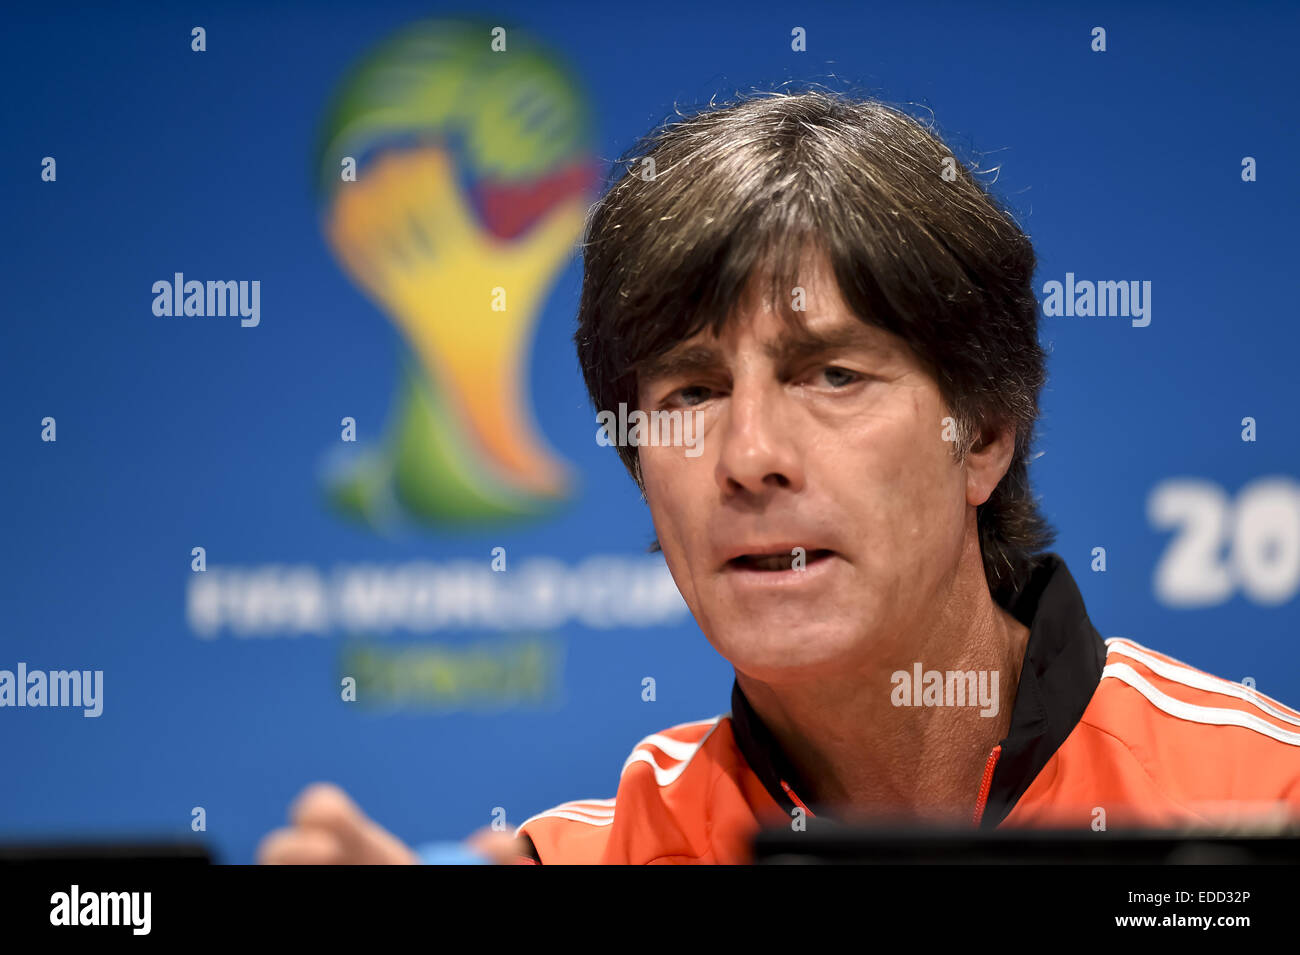 Head coach of Germany Joachim Loew answers to the media during a press conference on the eve of the 2014 FIFA World Cup Brazil Quarter Final match between France and Germany at Estadio Maracana  Featuring: Joachim Loew Where: Rio De Janeiro, Brazil When: Stock Photo